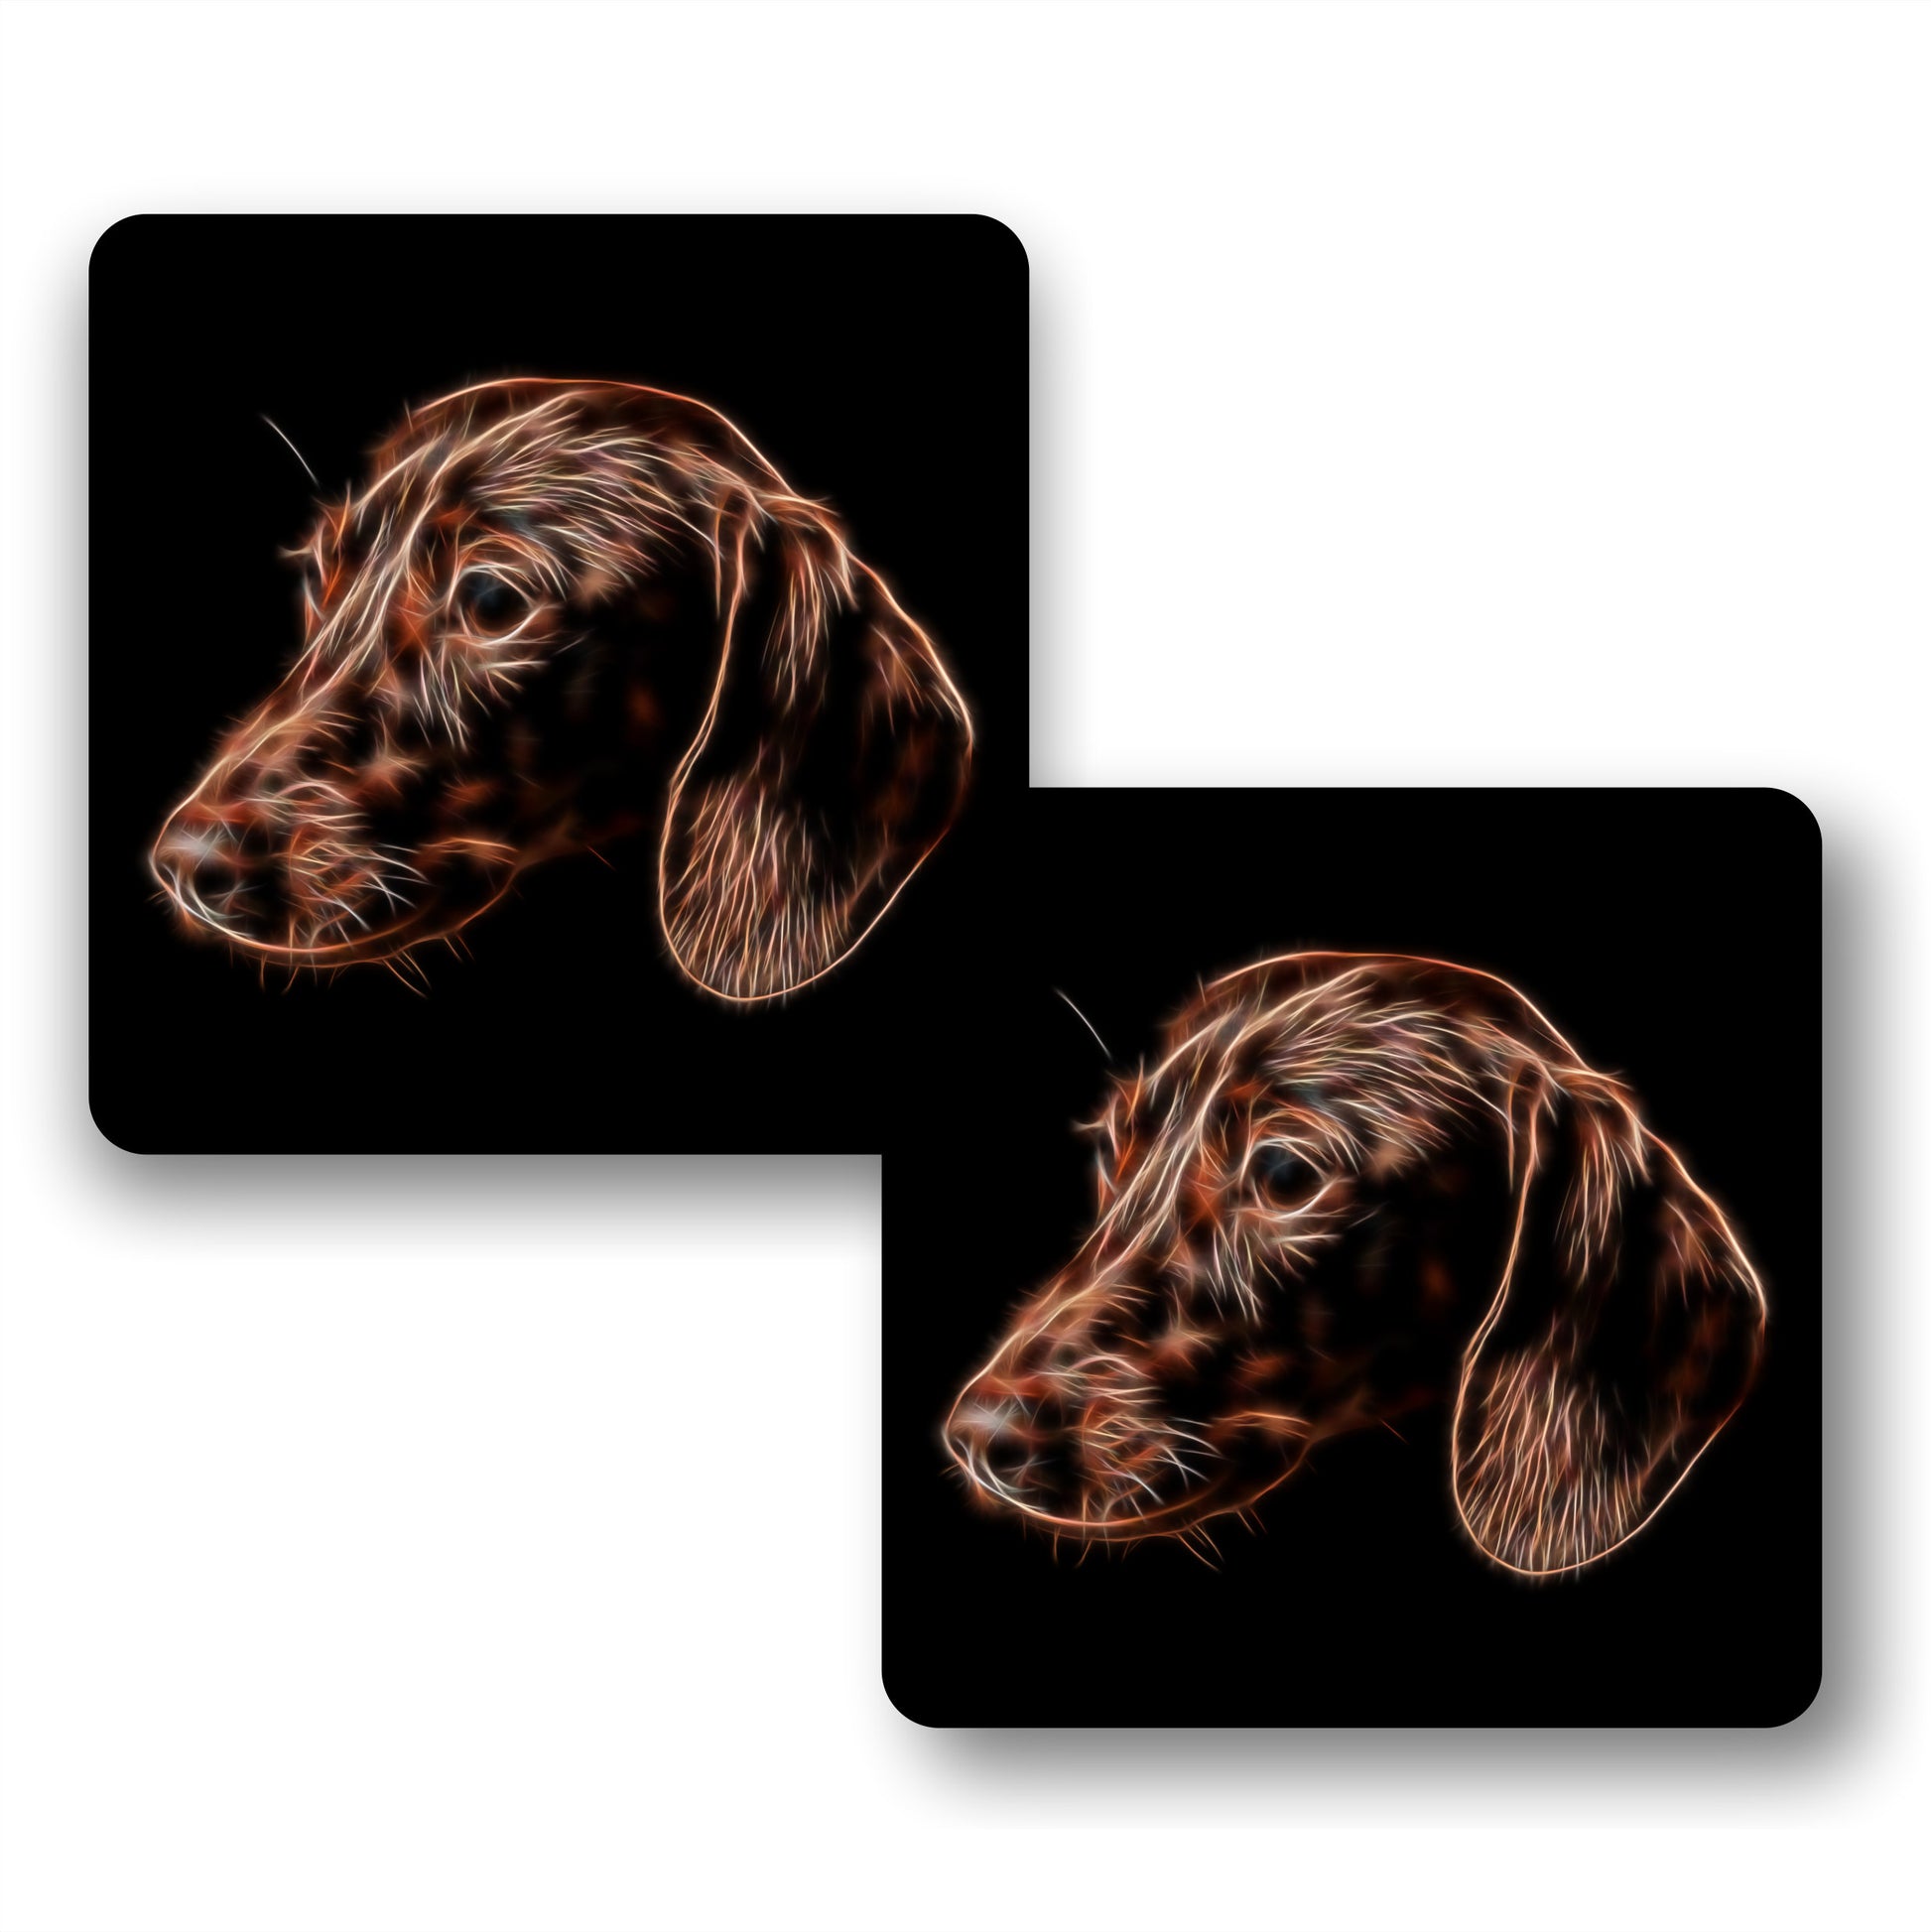 Chocolate Brown Dachshund Coasters, Set of 2, with Stunning Fractal Art Design